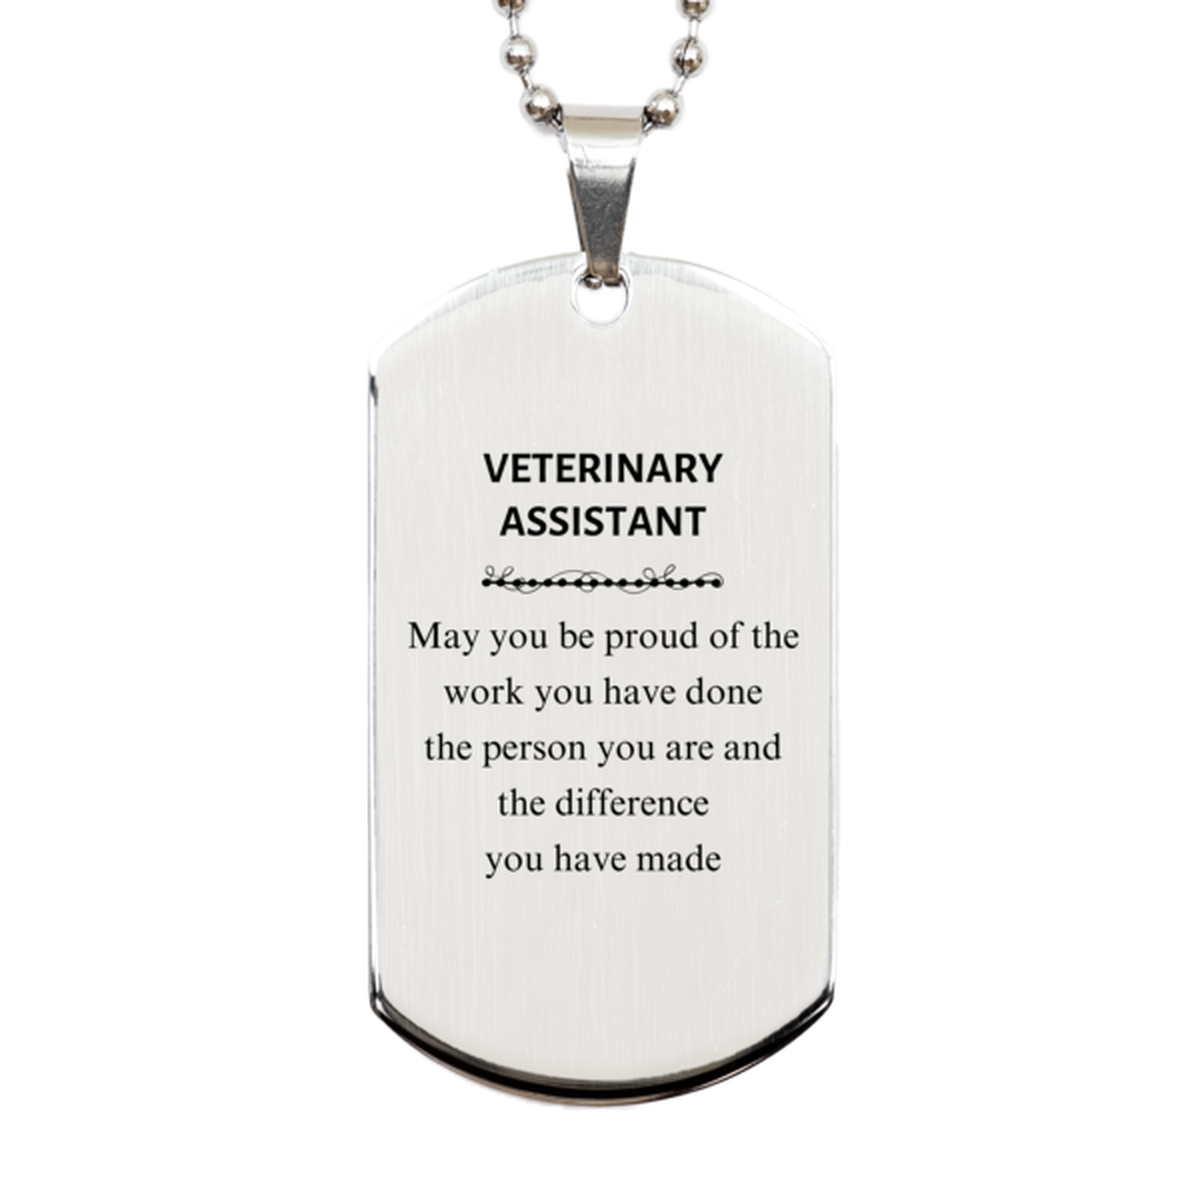 Veterinary Assistant May you be proud of the work you have done, Retirement Veterinary Assistant Silver Dog Tag for Colleague Appreciation Gifts Amazing for Veterinary Assistant